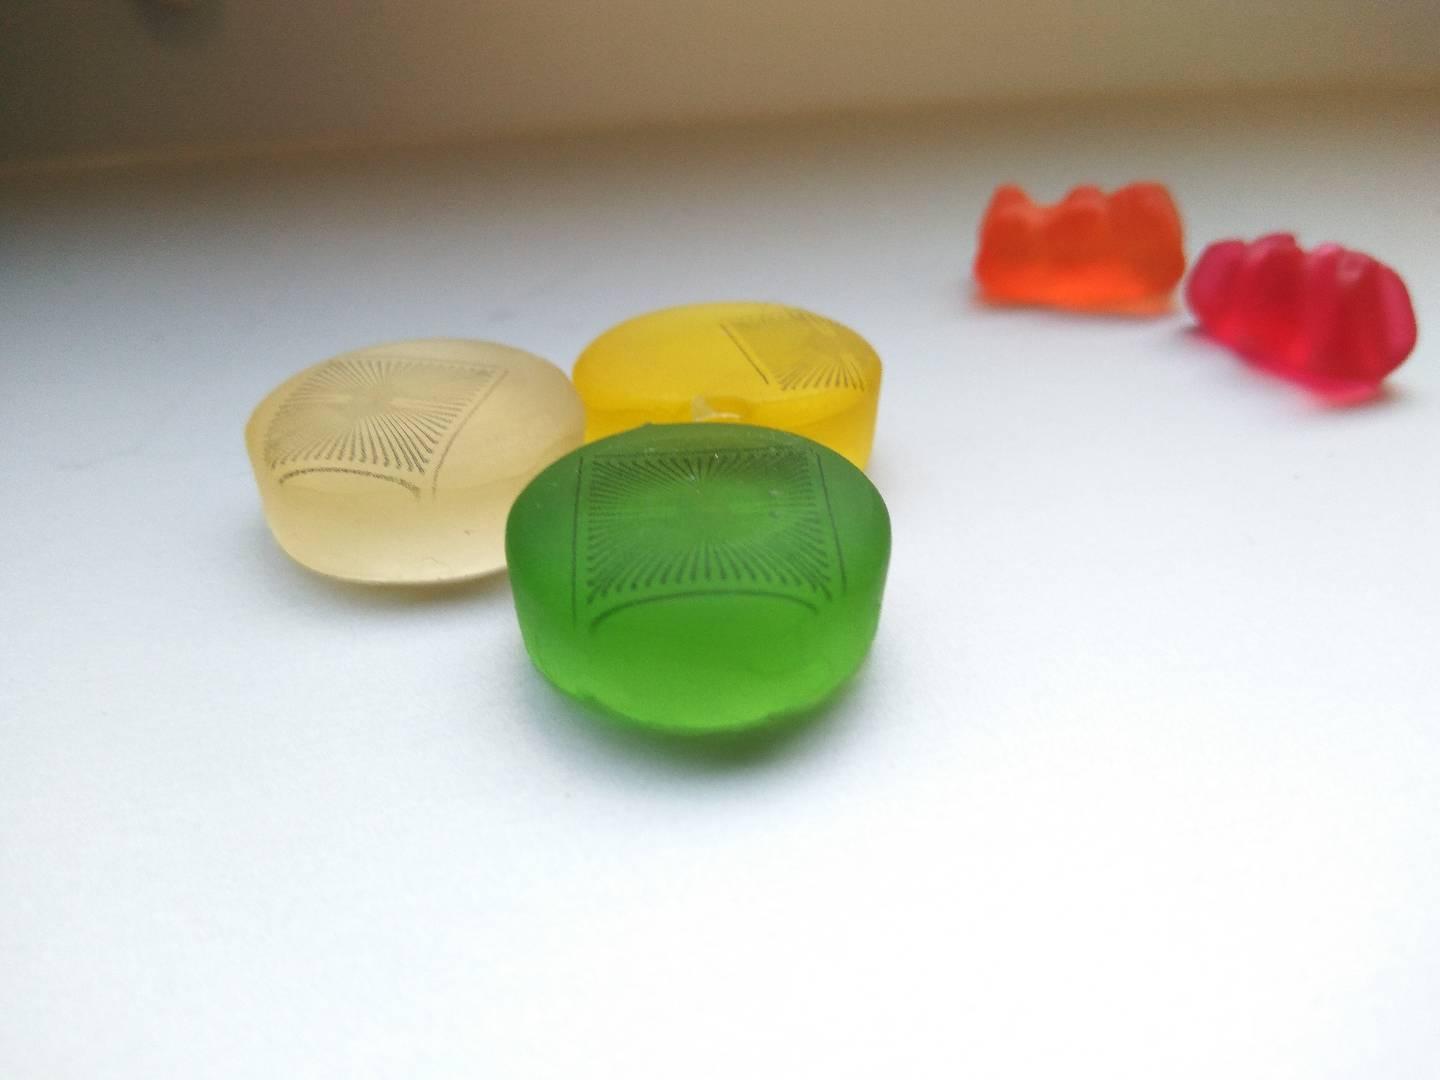 Microelectrode Arrays Printed on Gummi Candy